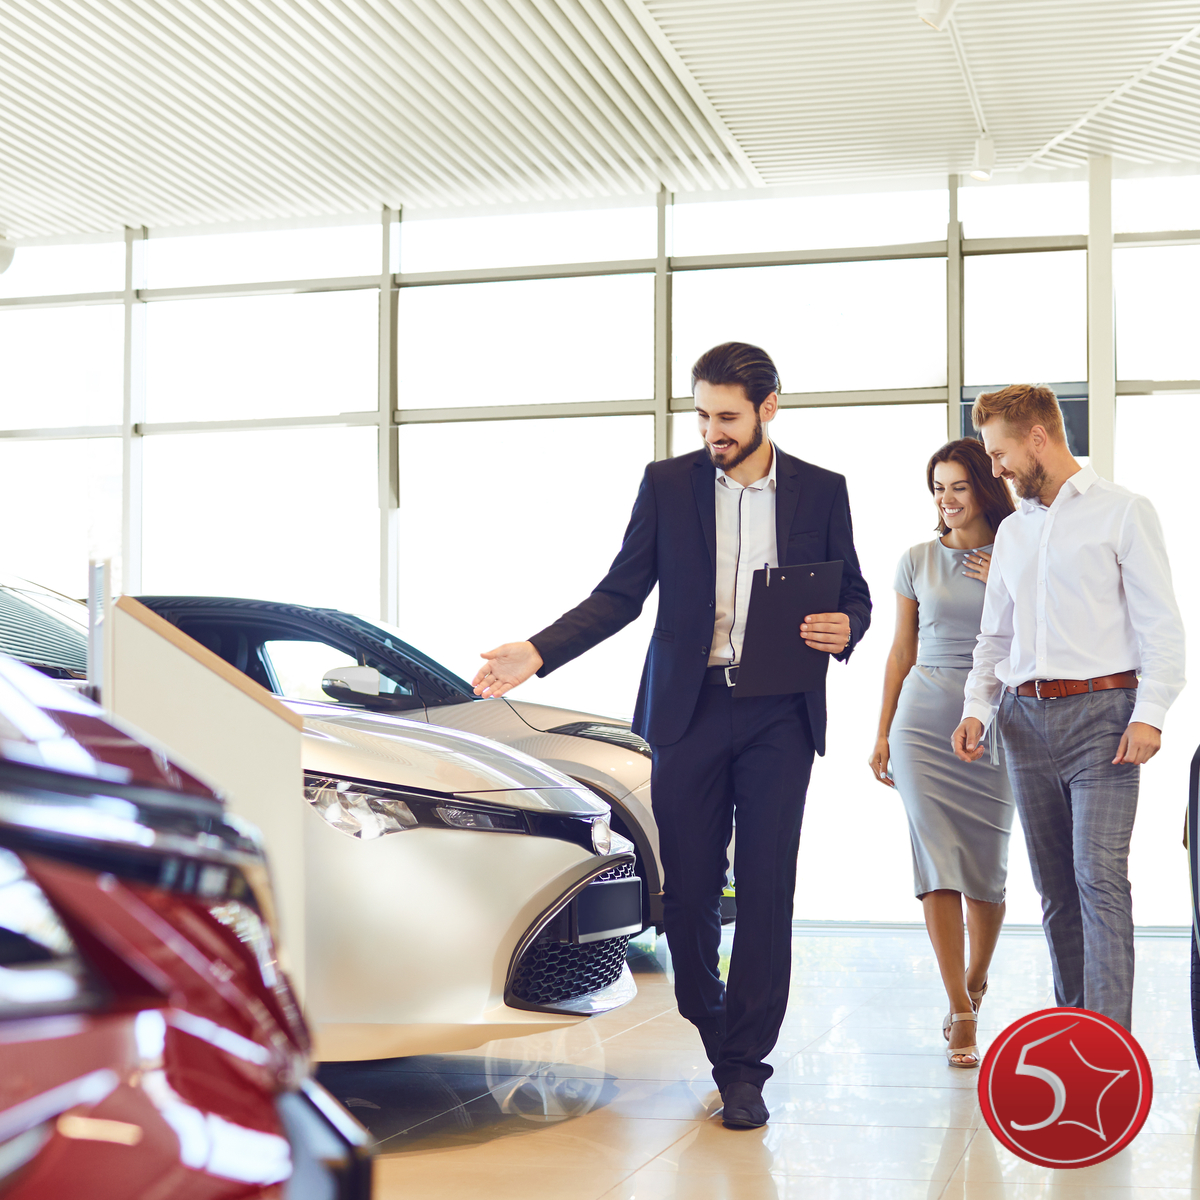 Shop in Comfort for Affordable Cars with 5 Star Auto Plaza!